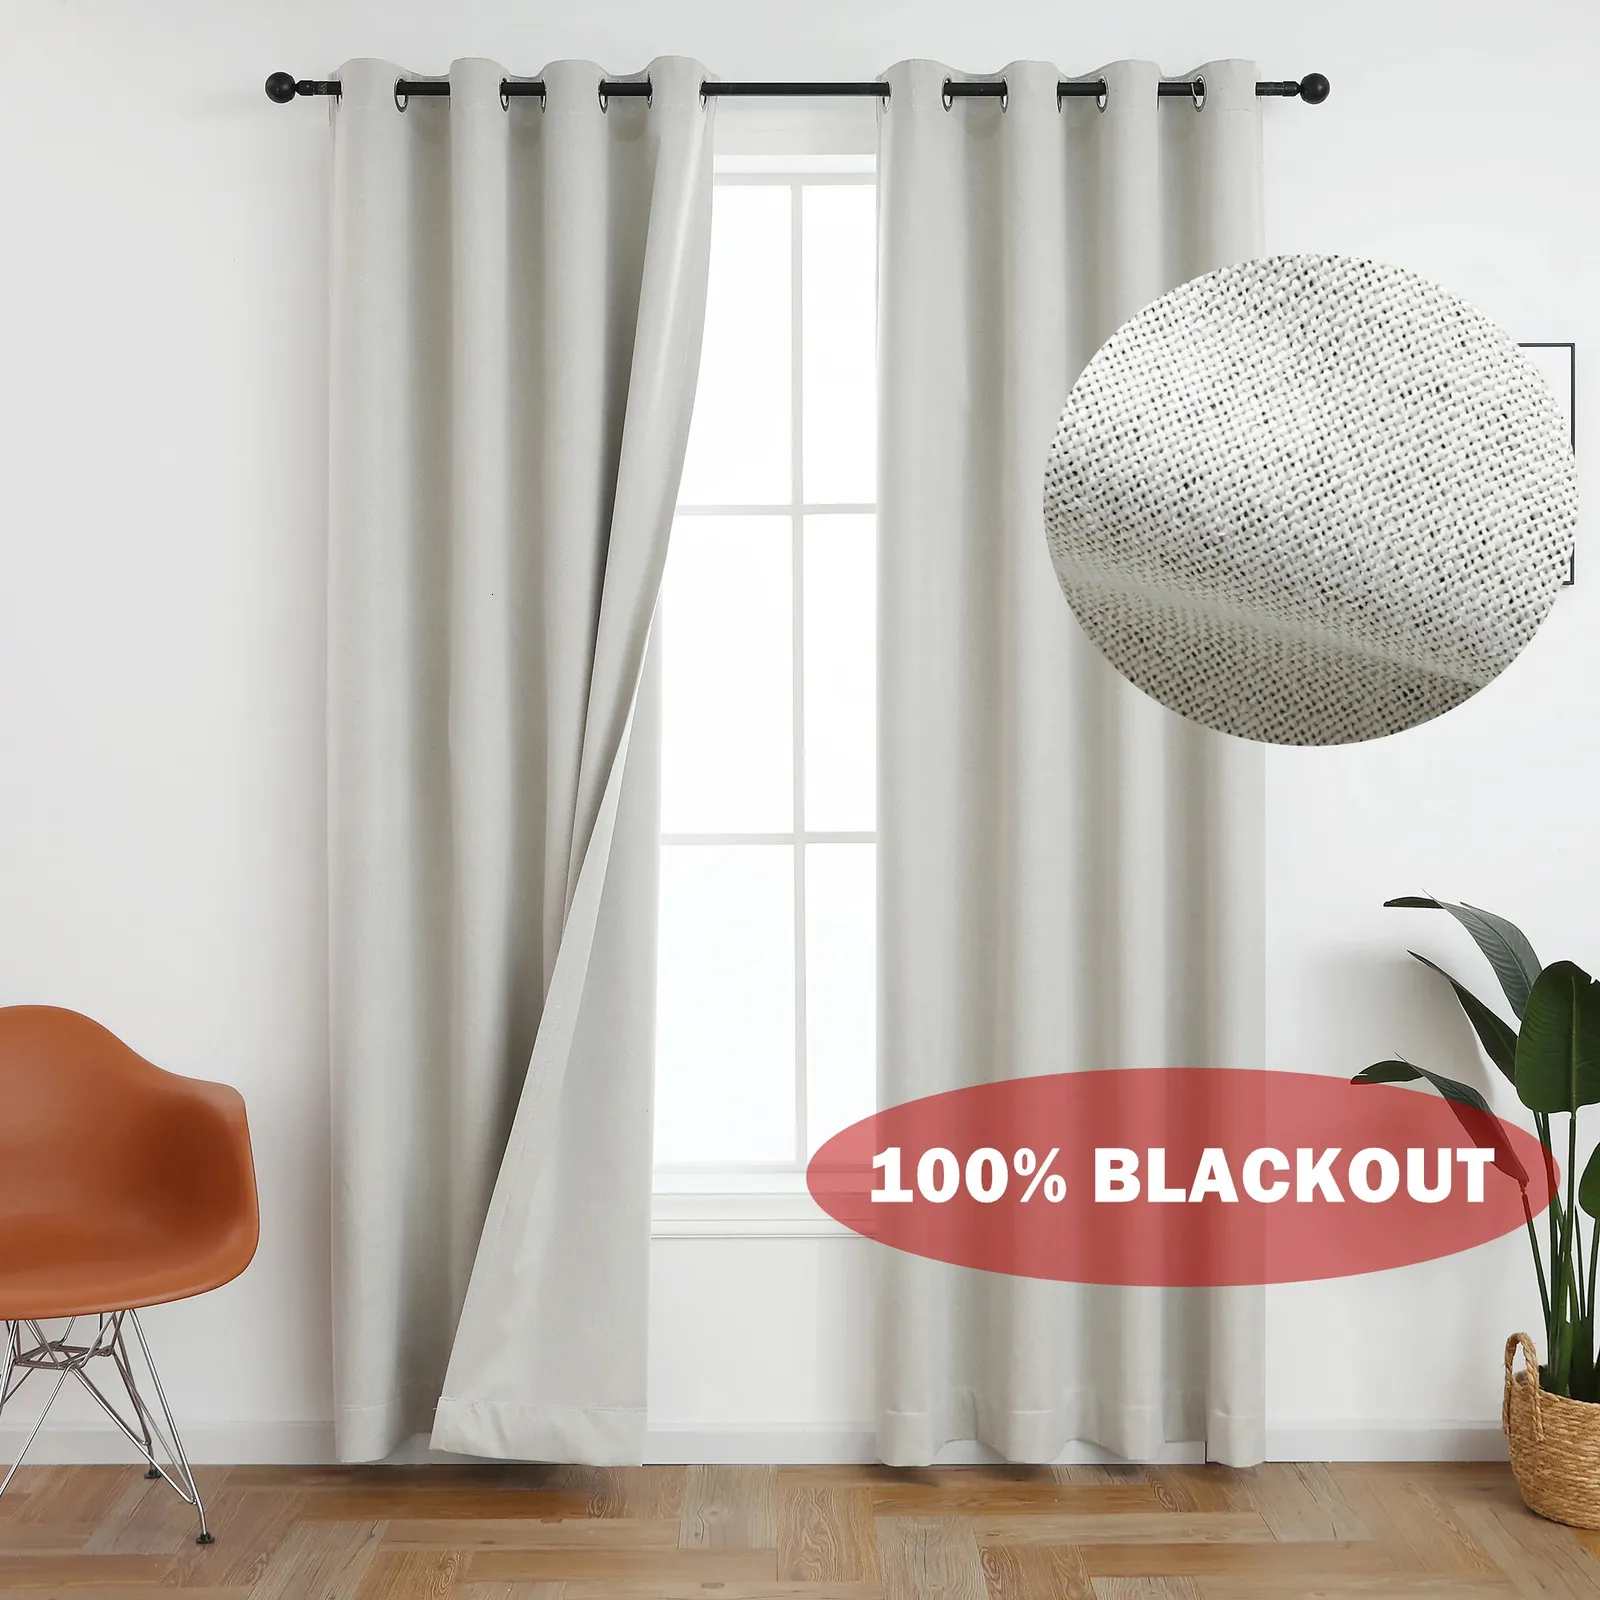 310cm Height 100% Blackout Solid Color Soundproof Curtain Blackout Faux Linen Curtains For Bedroom Living Room Drapes Window 240119